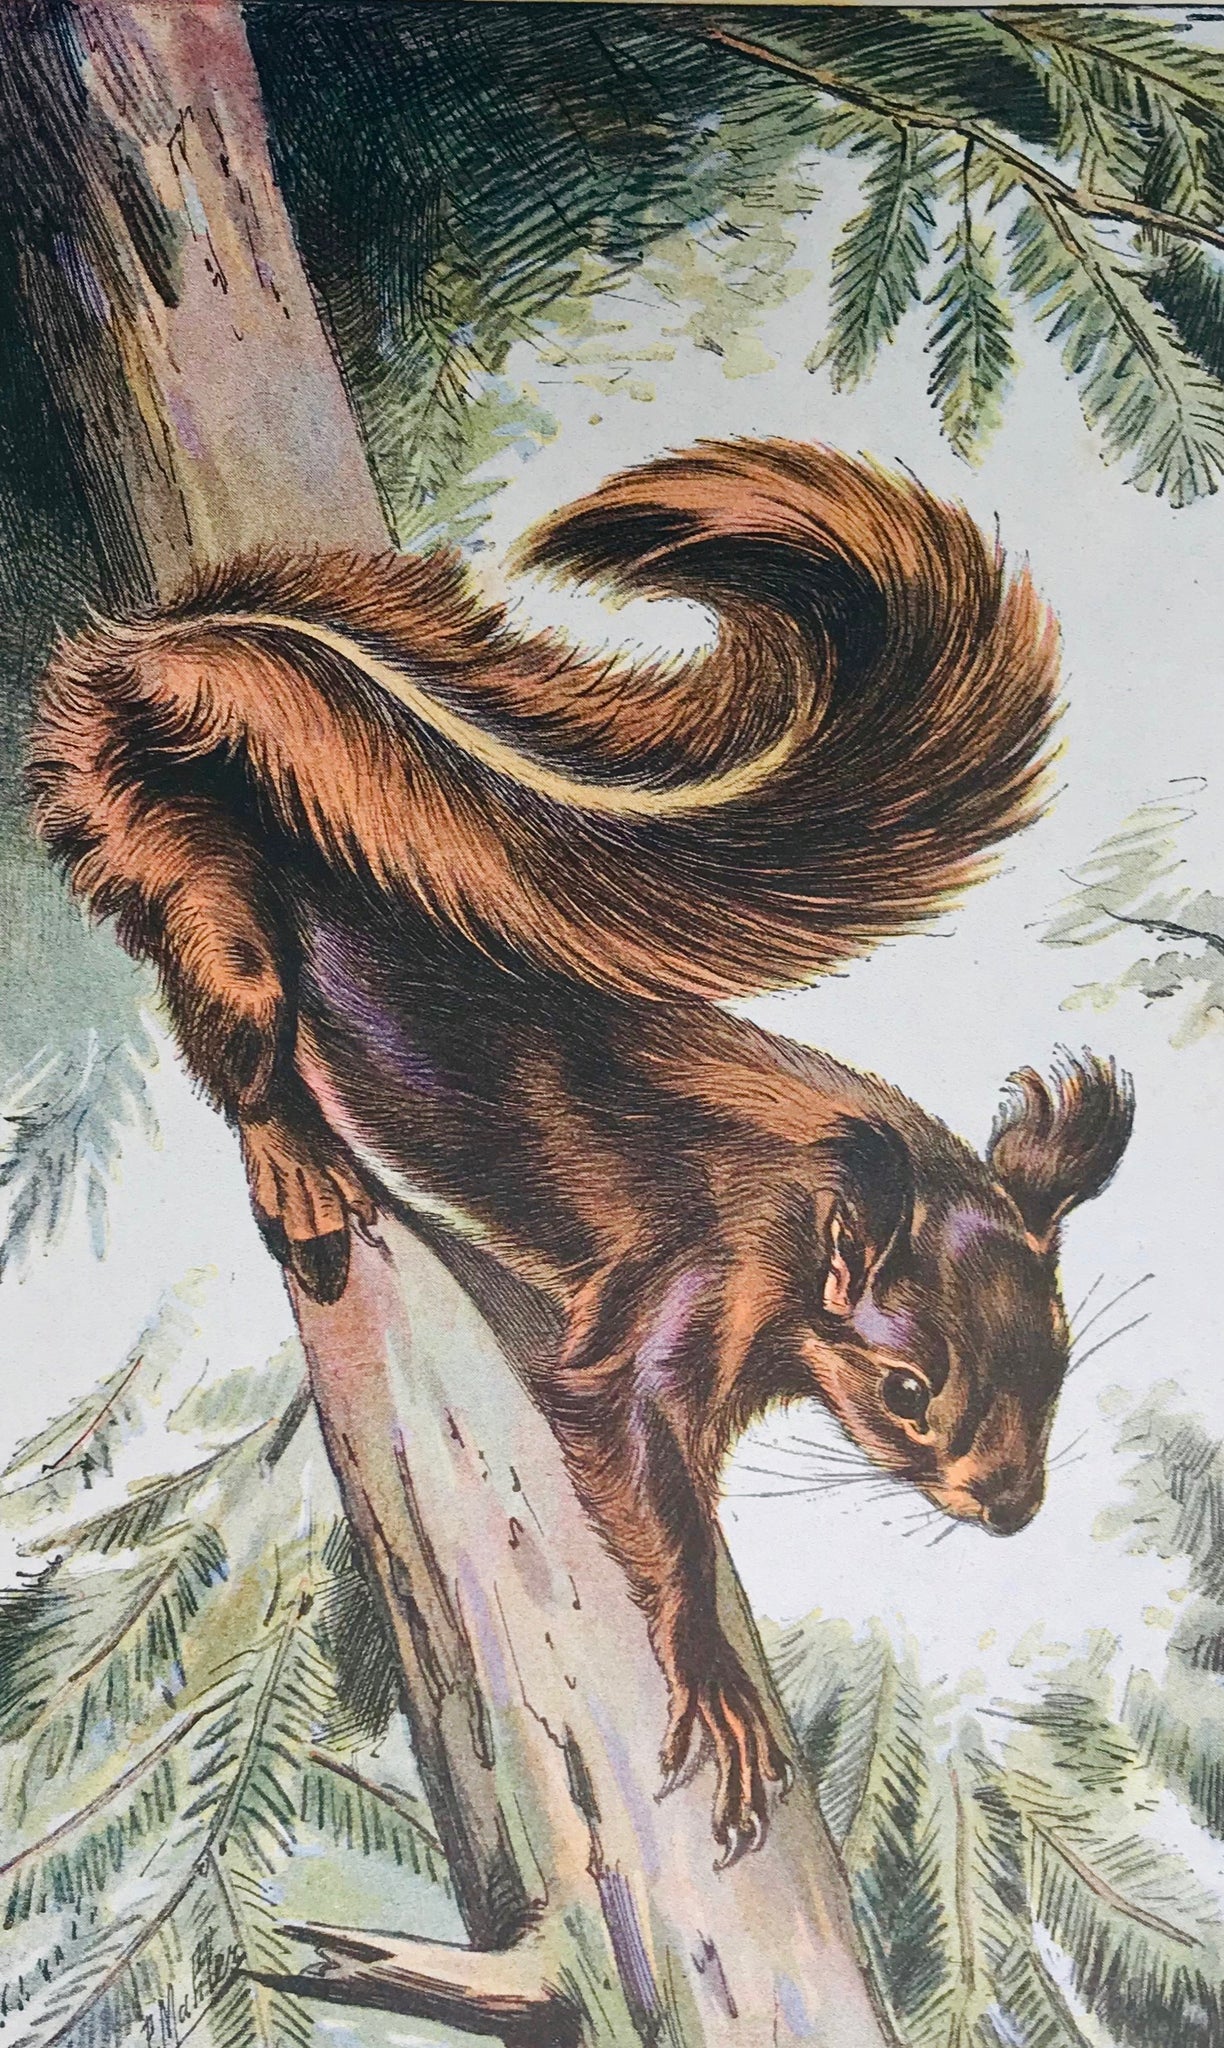 Squirrel: No title.  Photogravure printed in color after the original watercolor by P. Mahler. 1907.